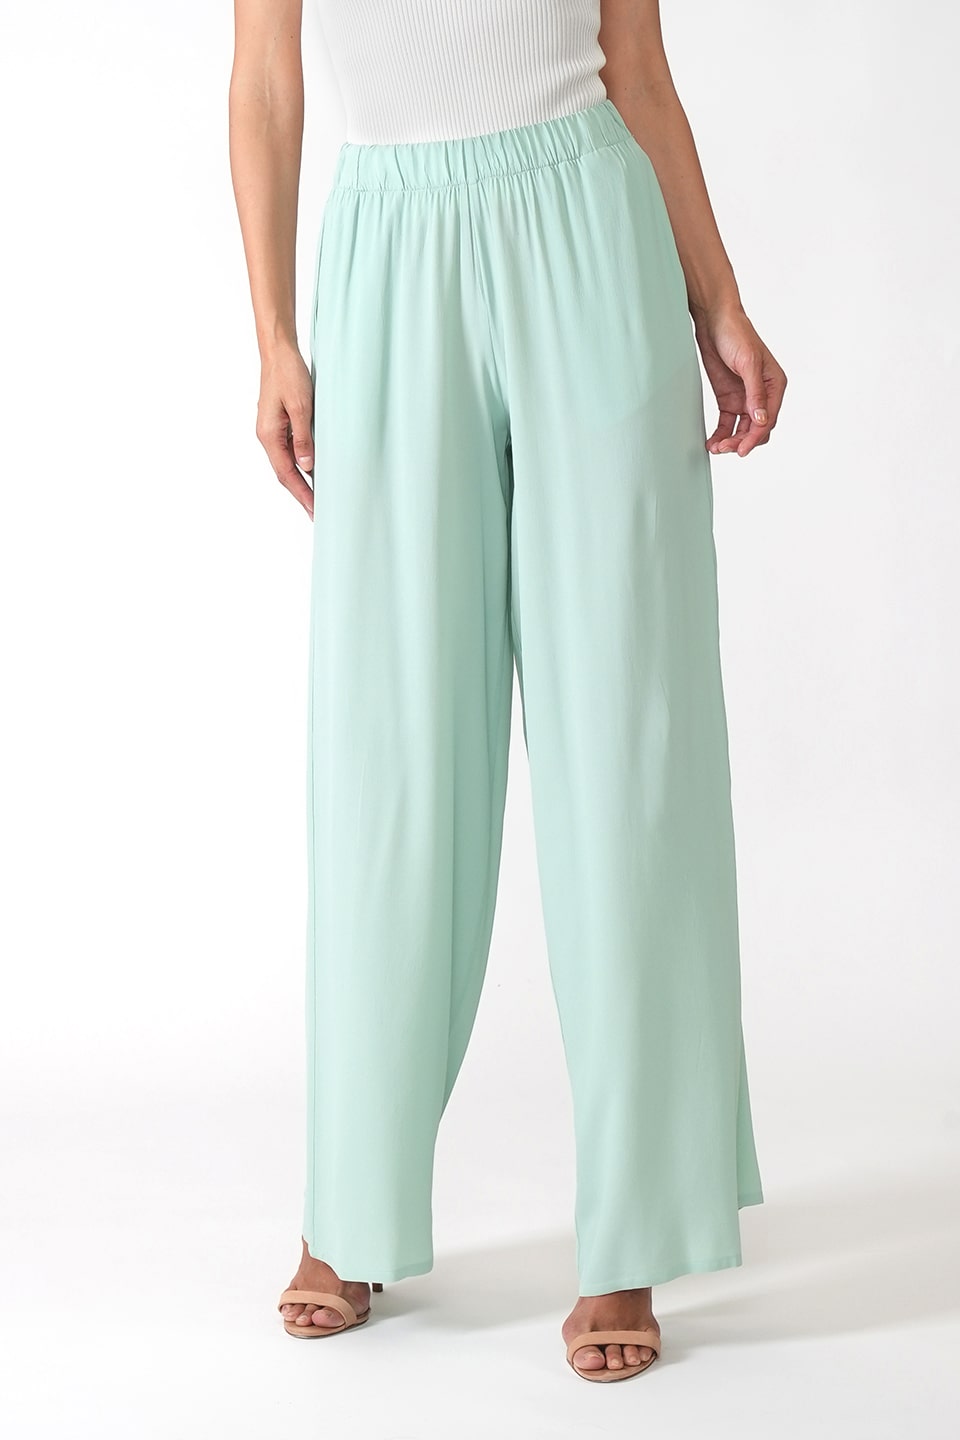 Designer Green Women pants, shop online with free delivery in UAE. Product gallery 4